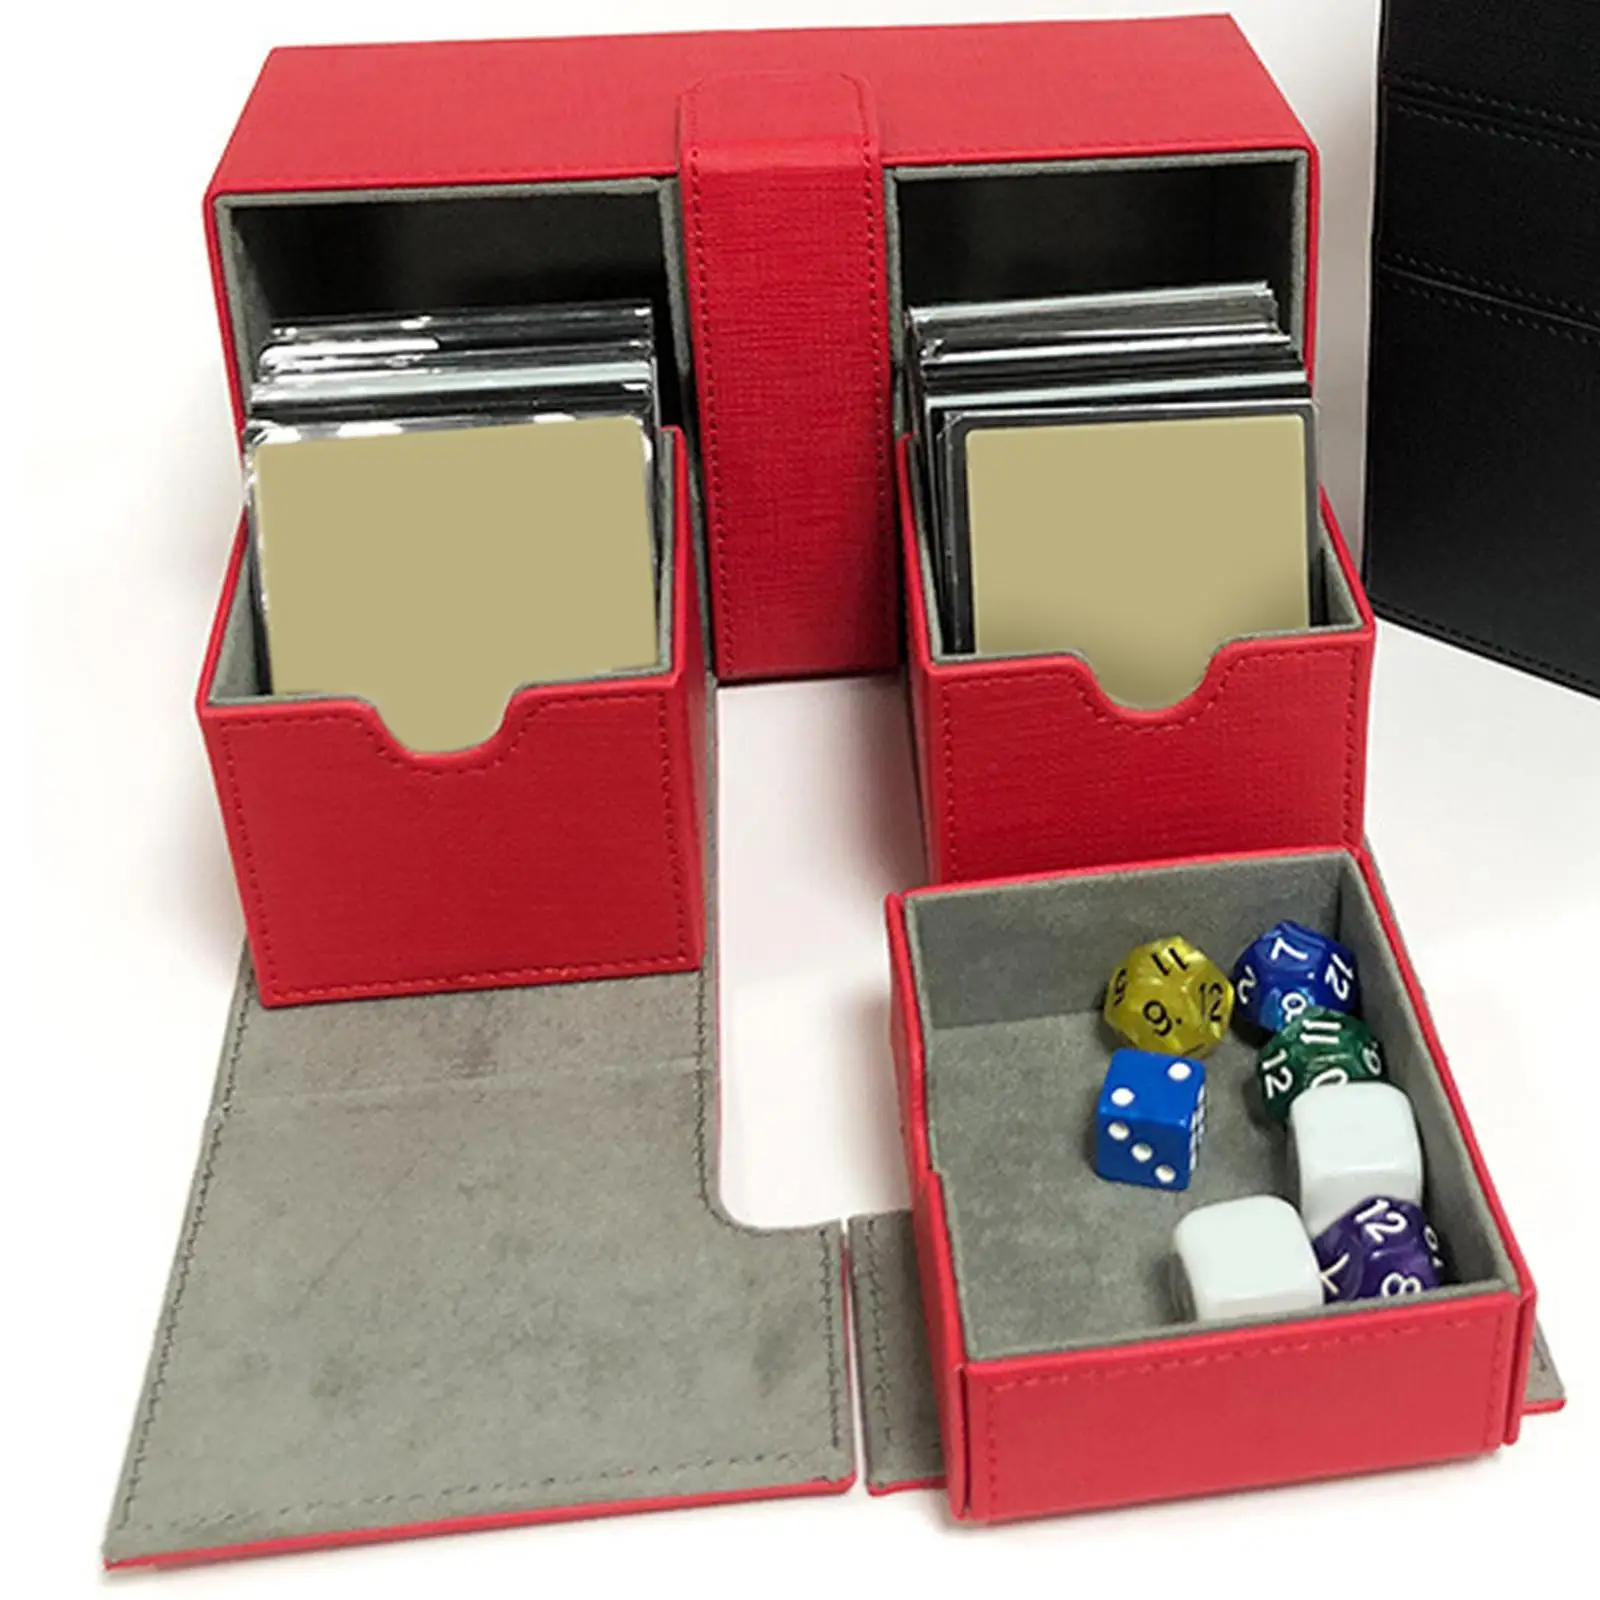 Large Deck Box Deck Storage Box Easy to Open Drawers Large Capacity Sturdy Super Solid Deck Case for Baseball Cards Storage